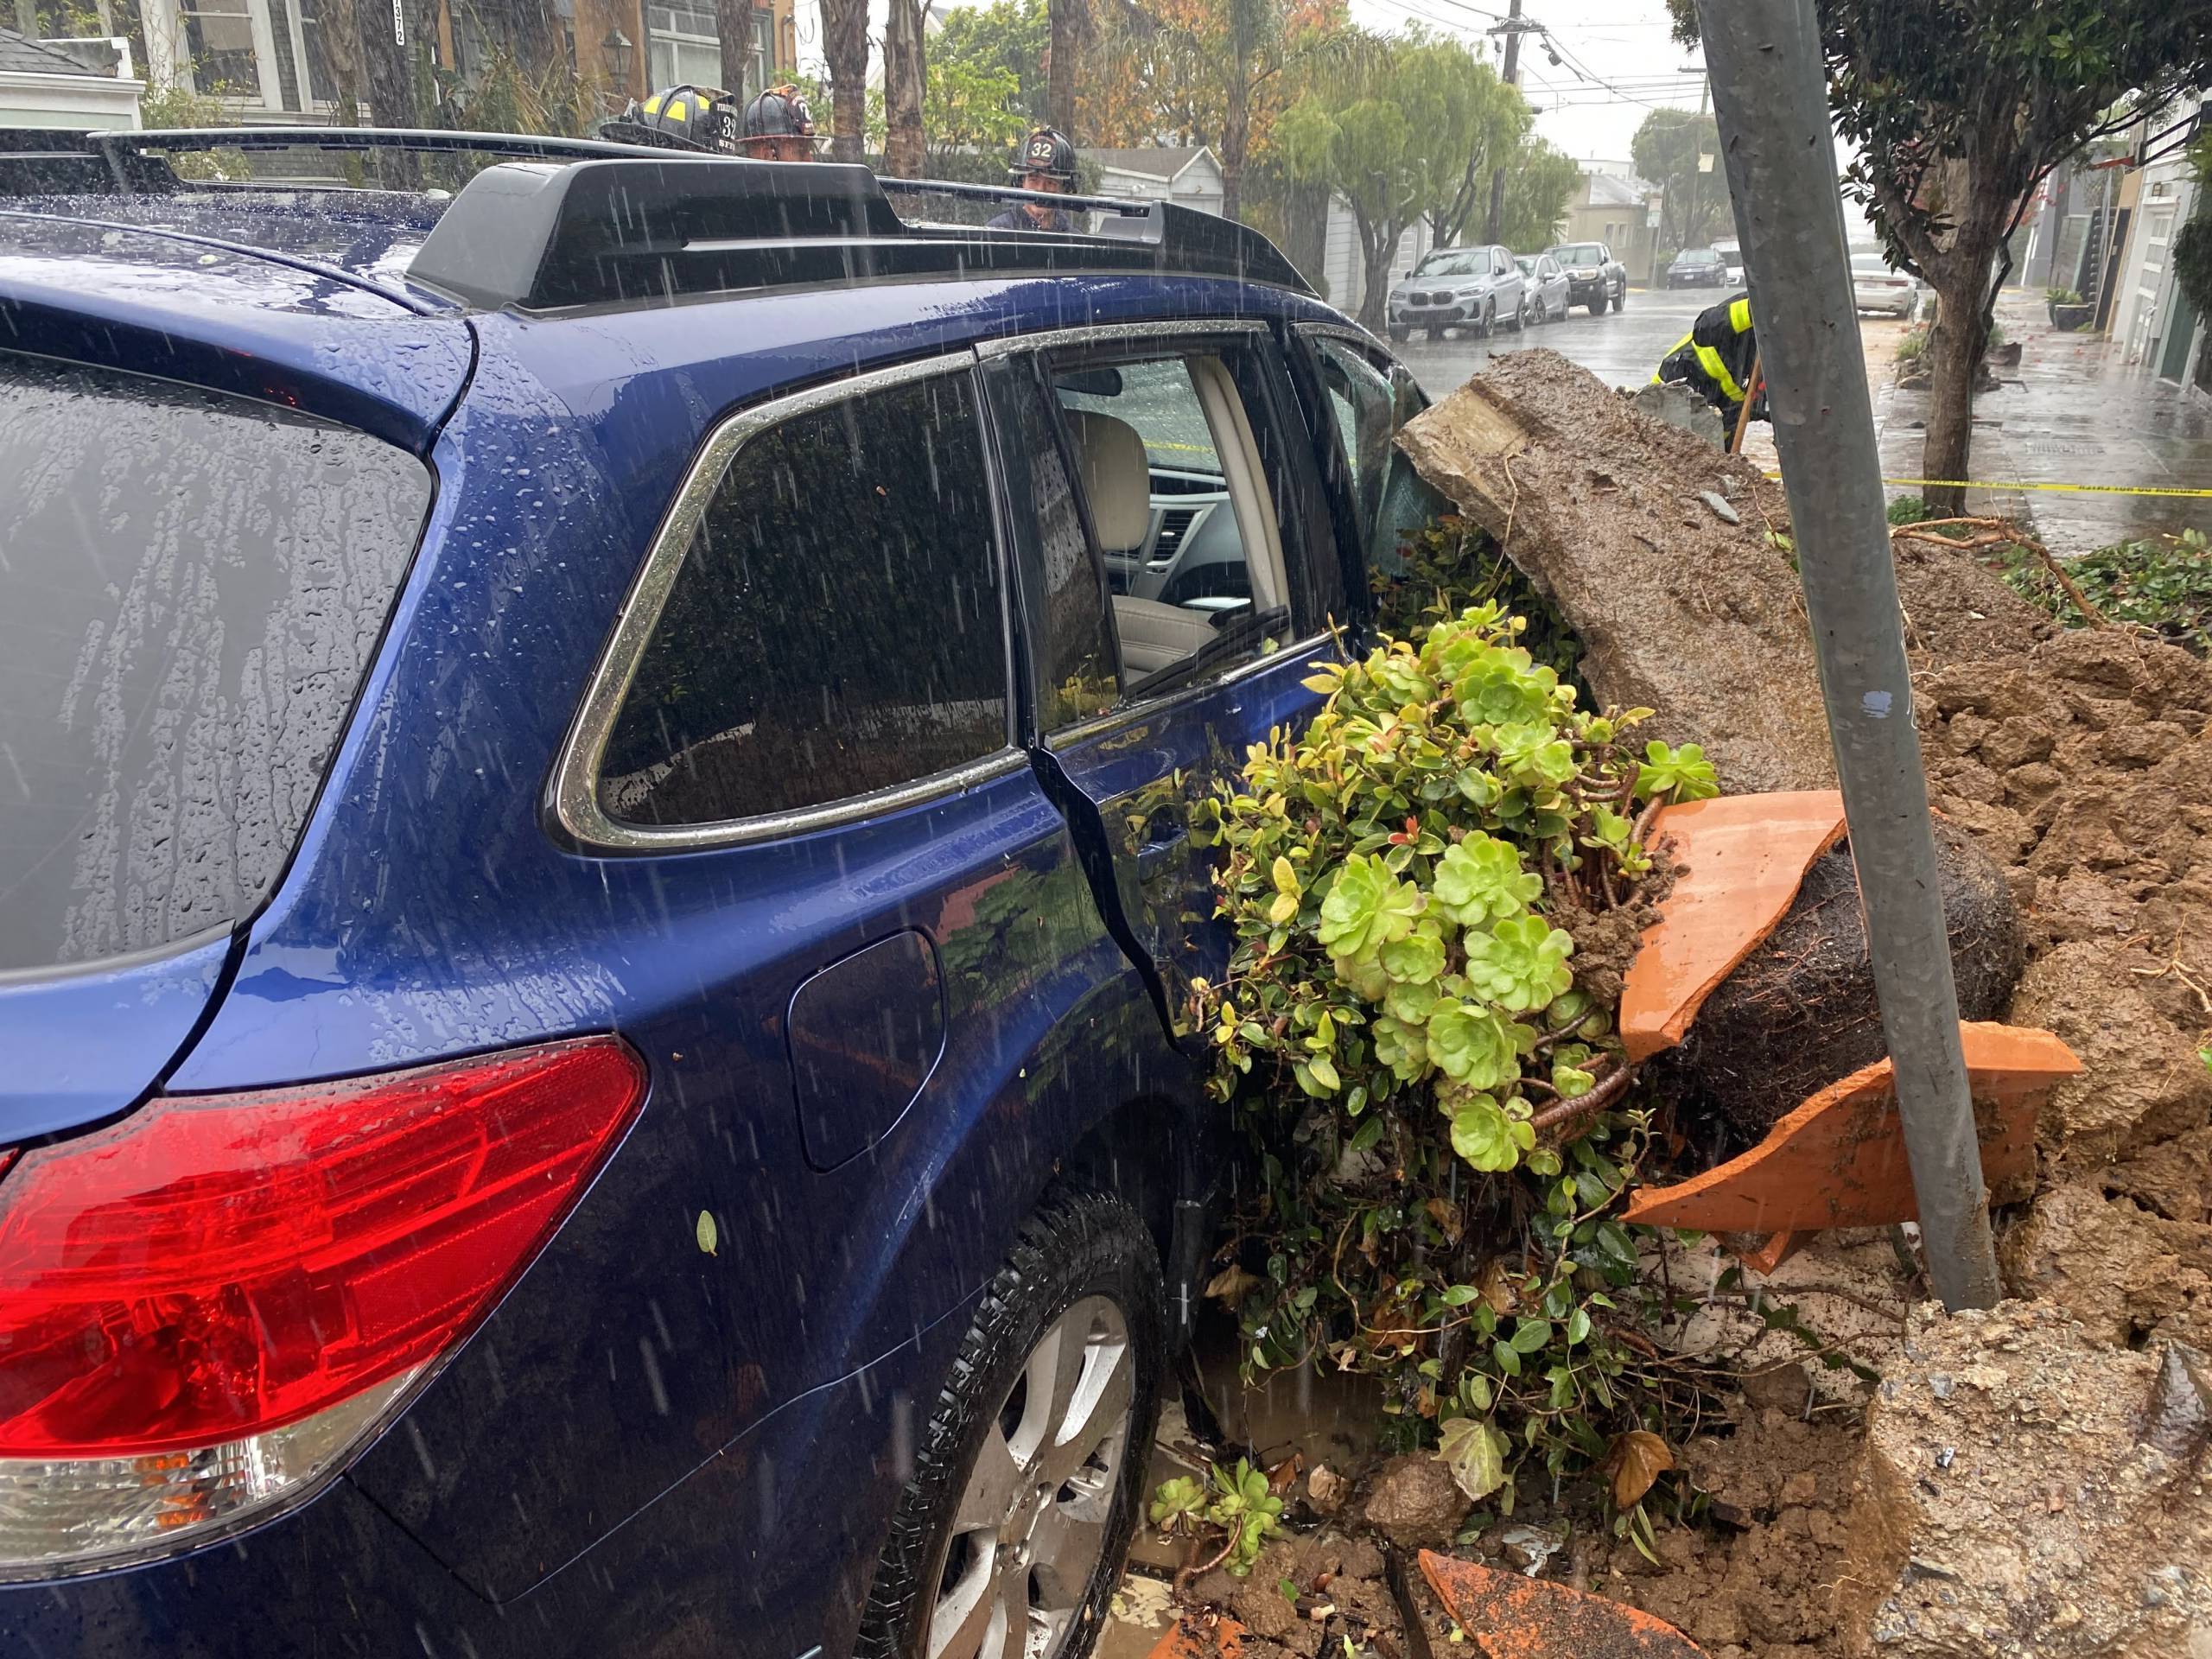 Rain pours down on a navy blue Subaru Outback that is surrounded by rubble and debris from a landslide that totaled the vehicle.